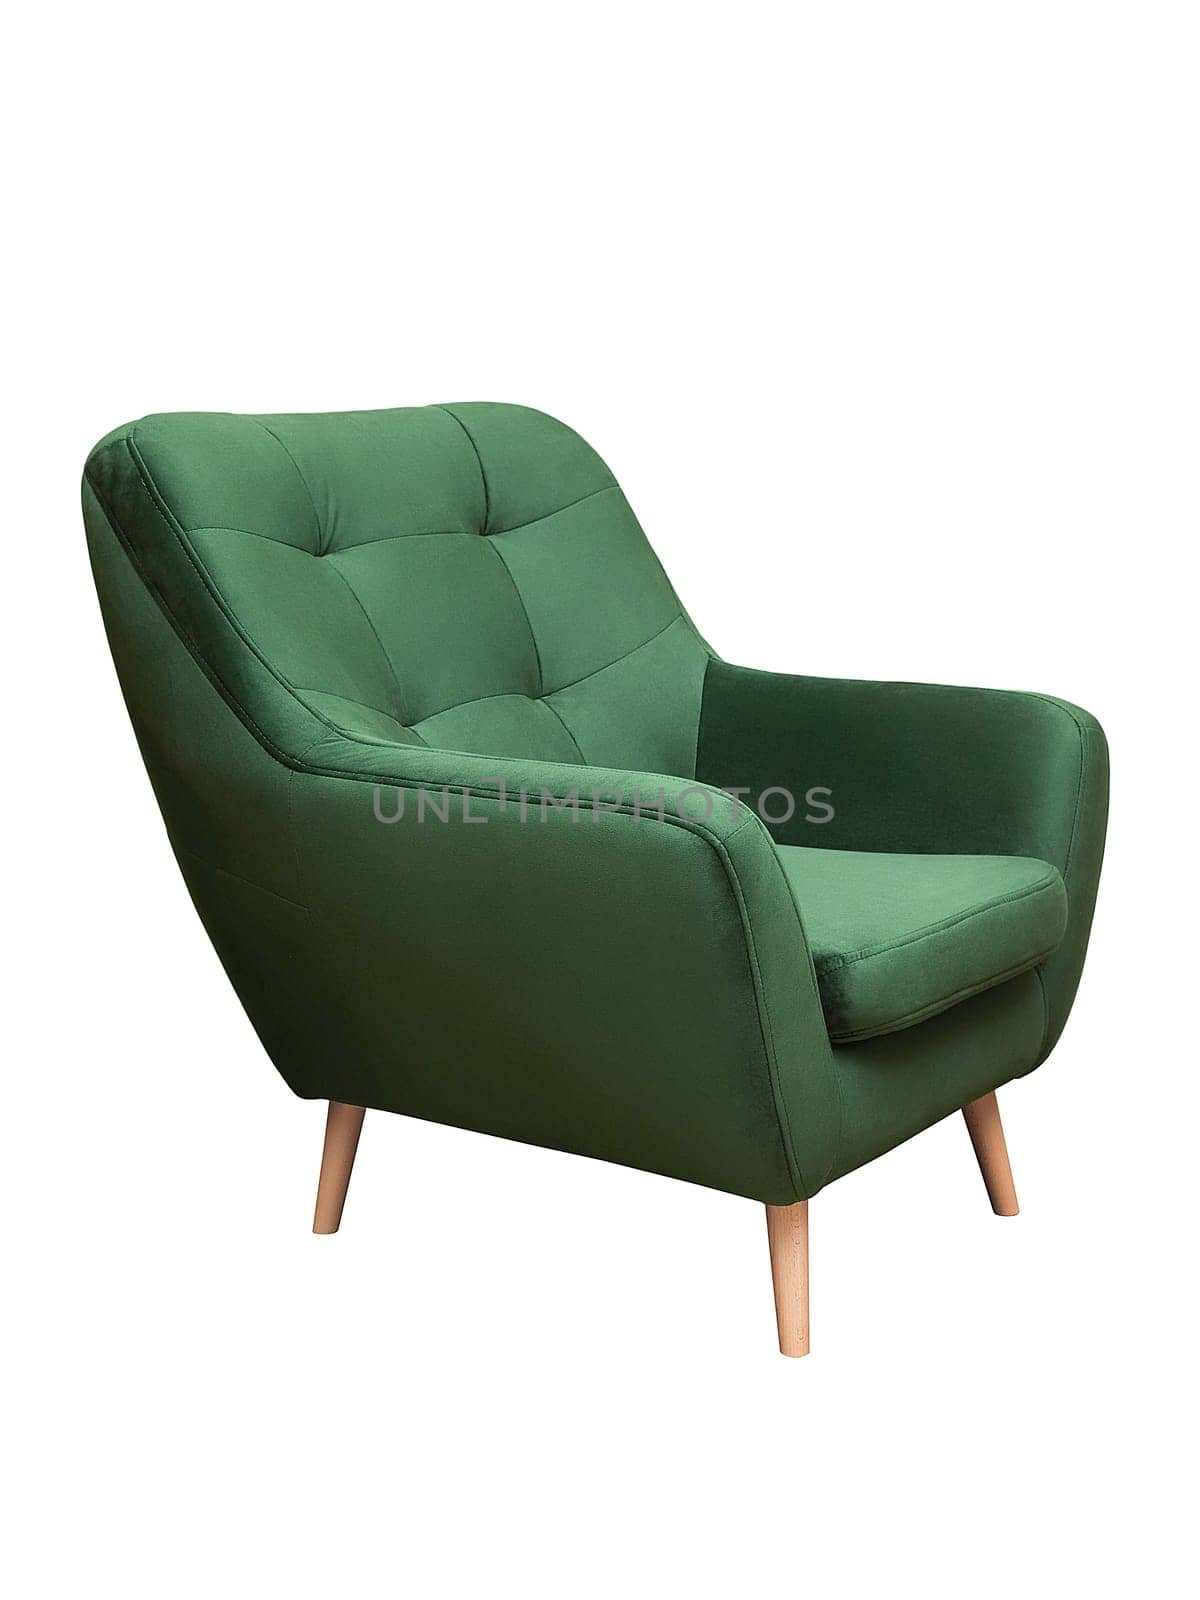 Modern green fabric armchair with wooden legs isolated on white background, side view. furniture, interior, home design in minimal style